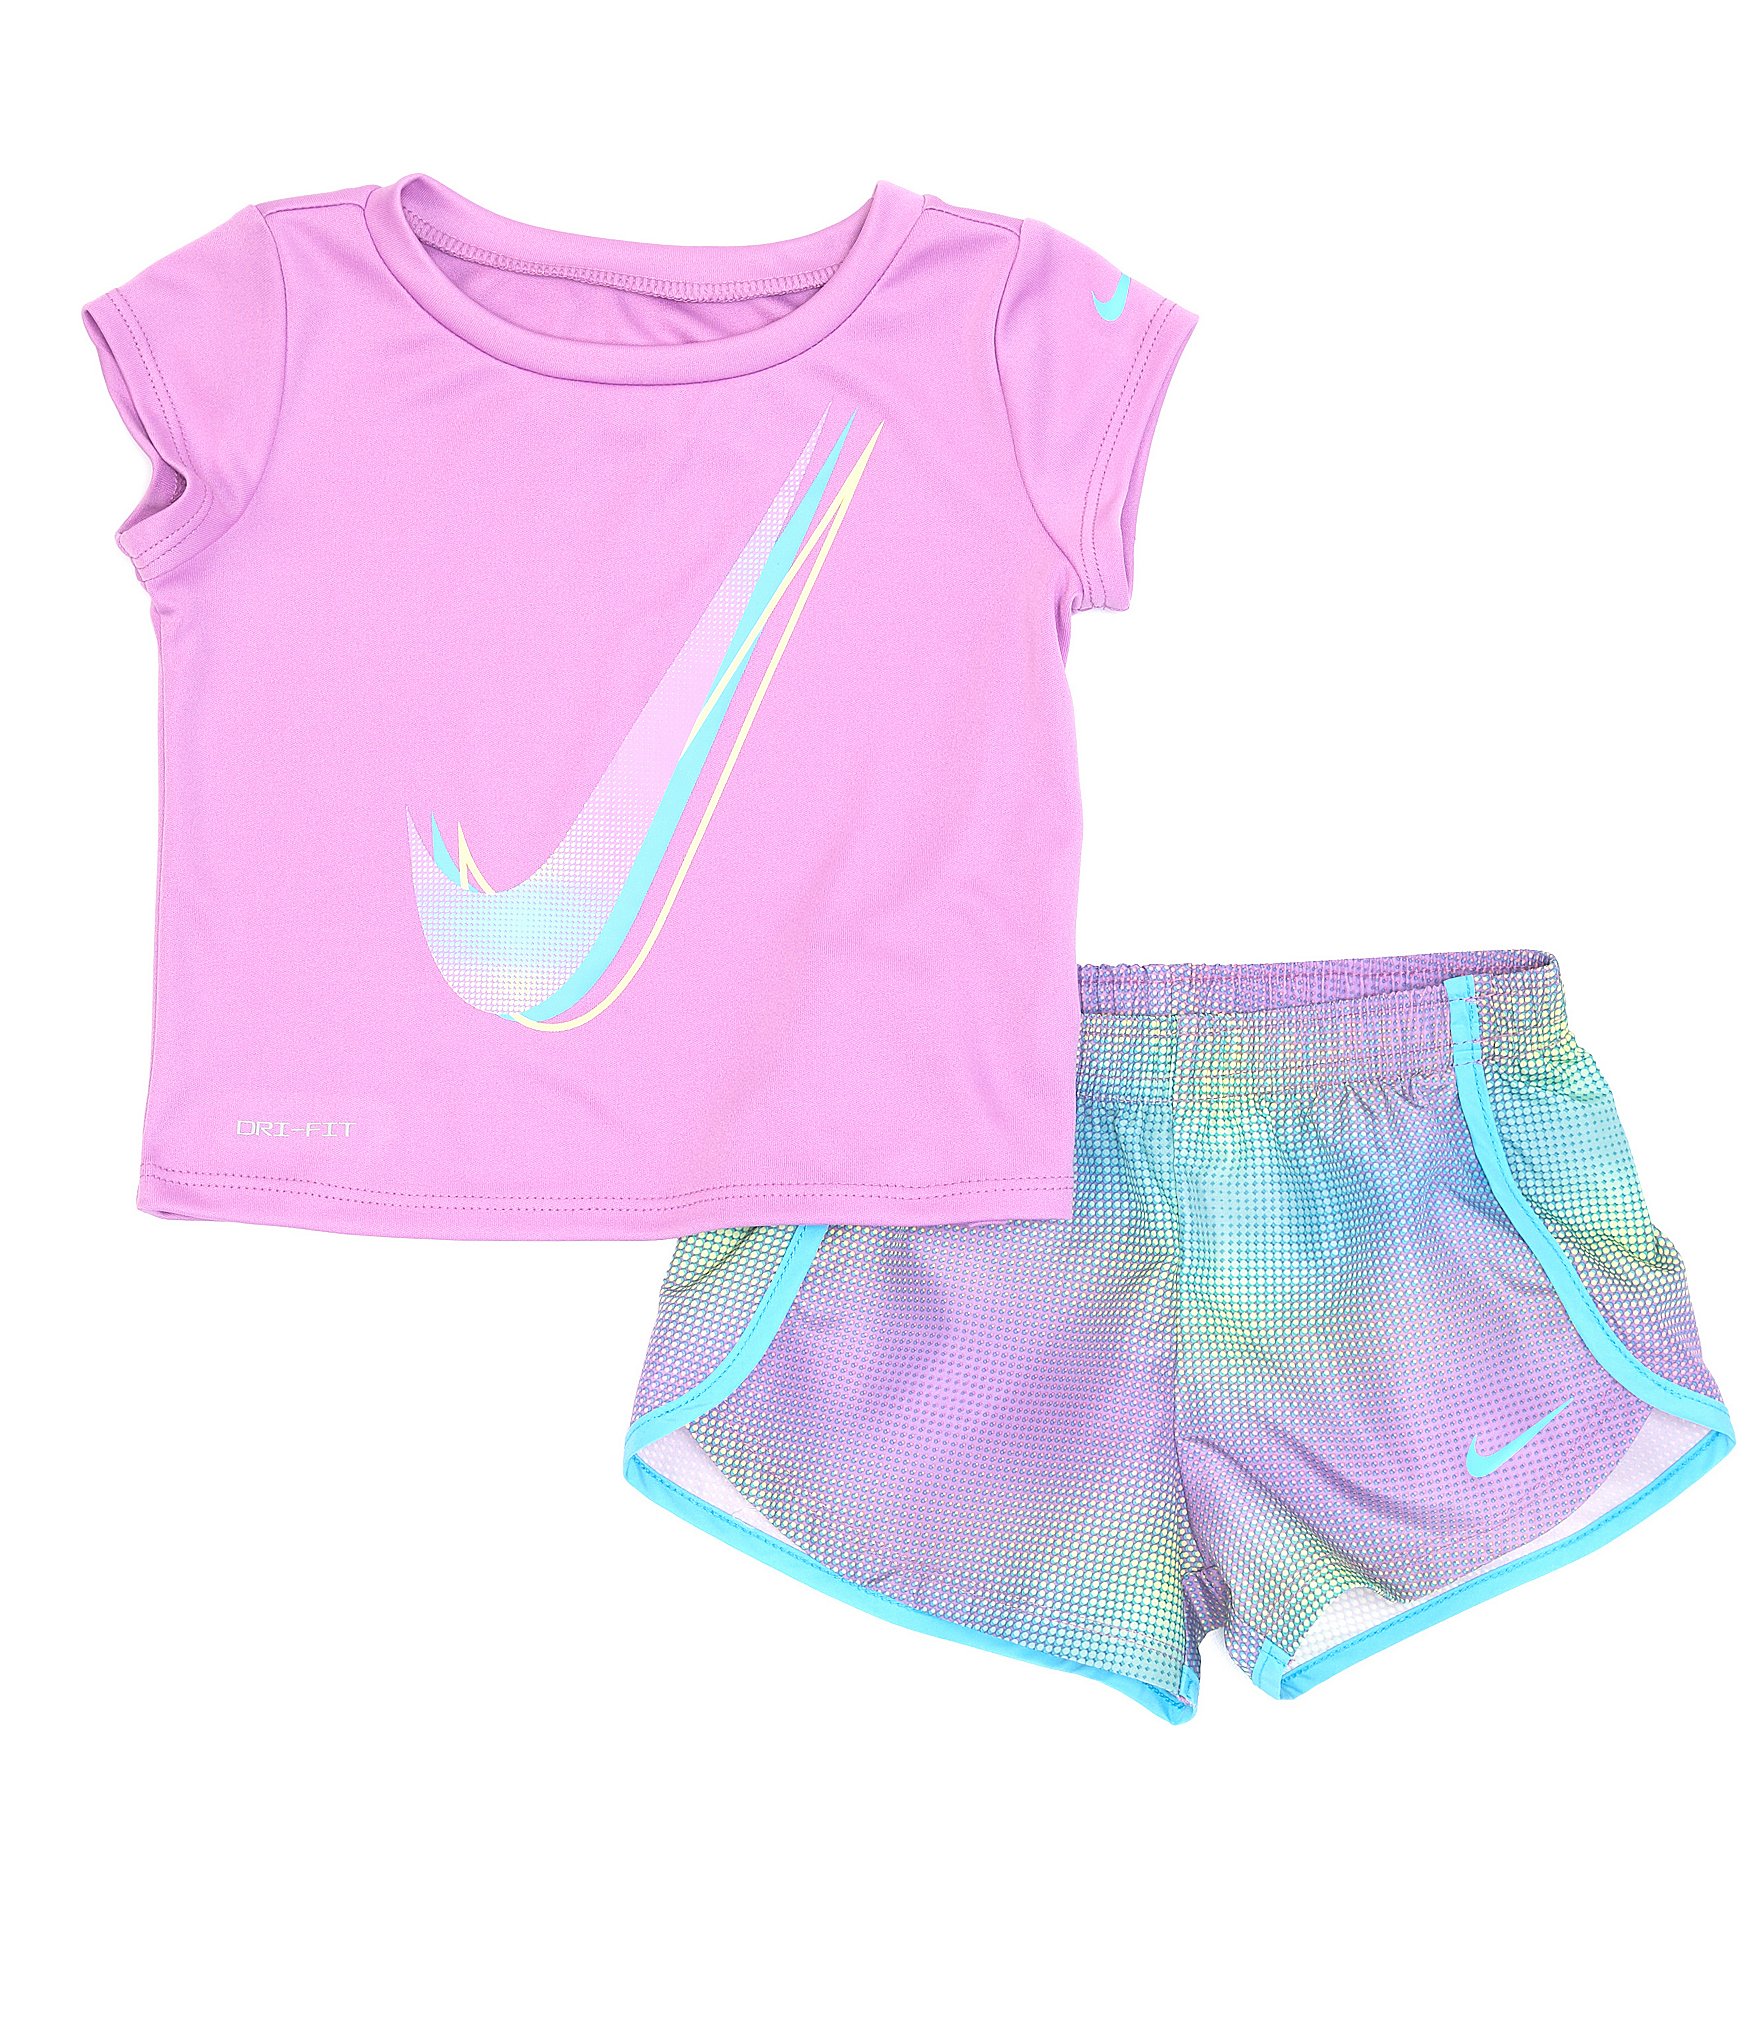 Nike Baby Girls' Clothing for sale in Ann Arbor, Michigan